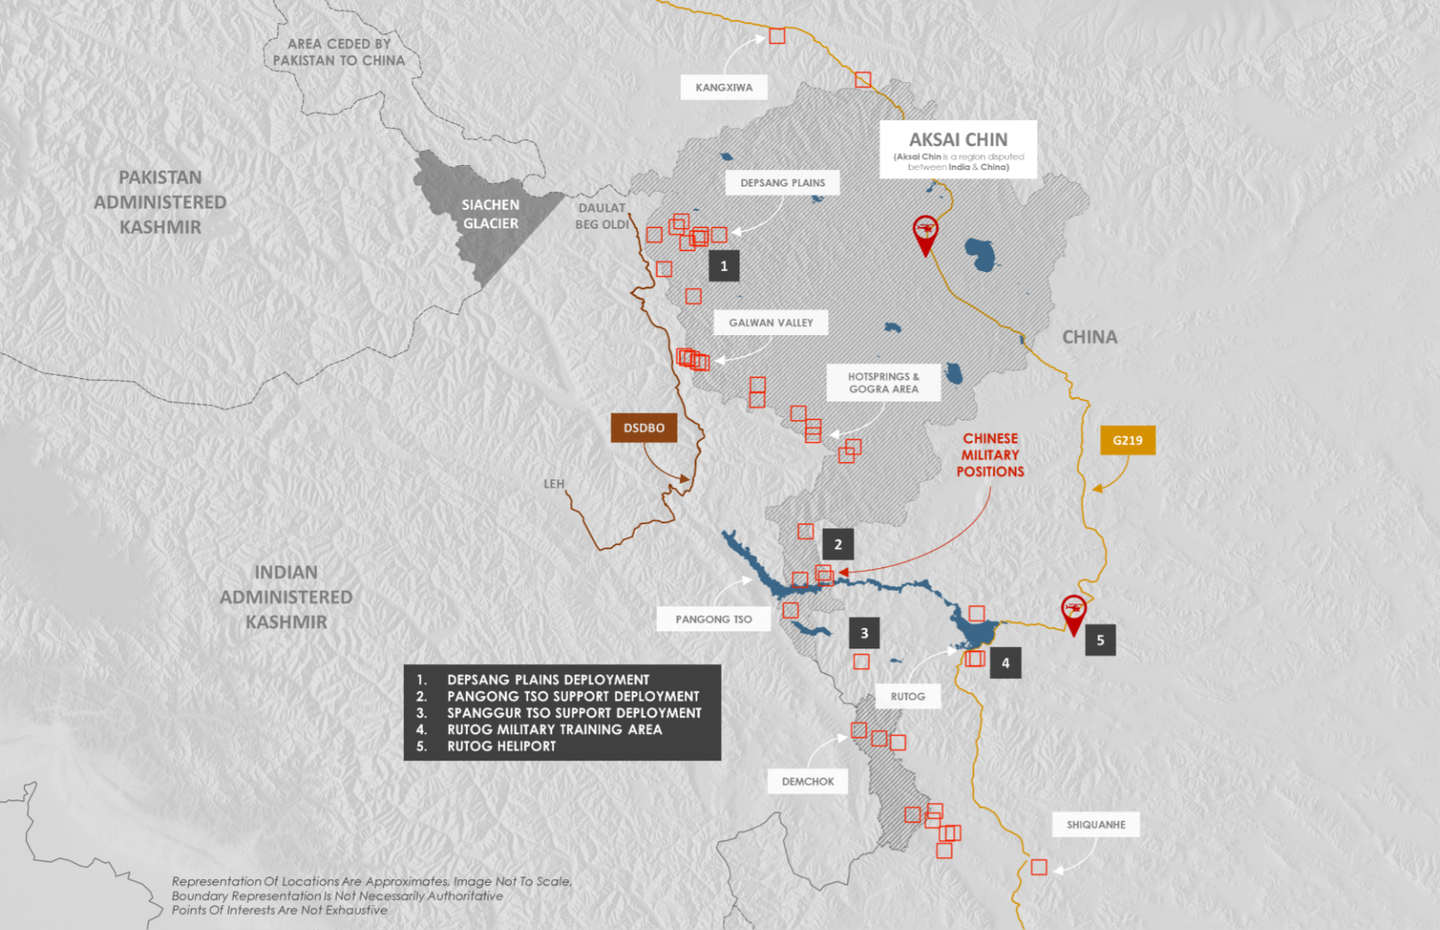 A map showing major Chinese military infrastructure developments in the region from our previous piece.